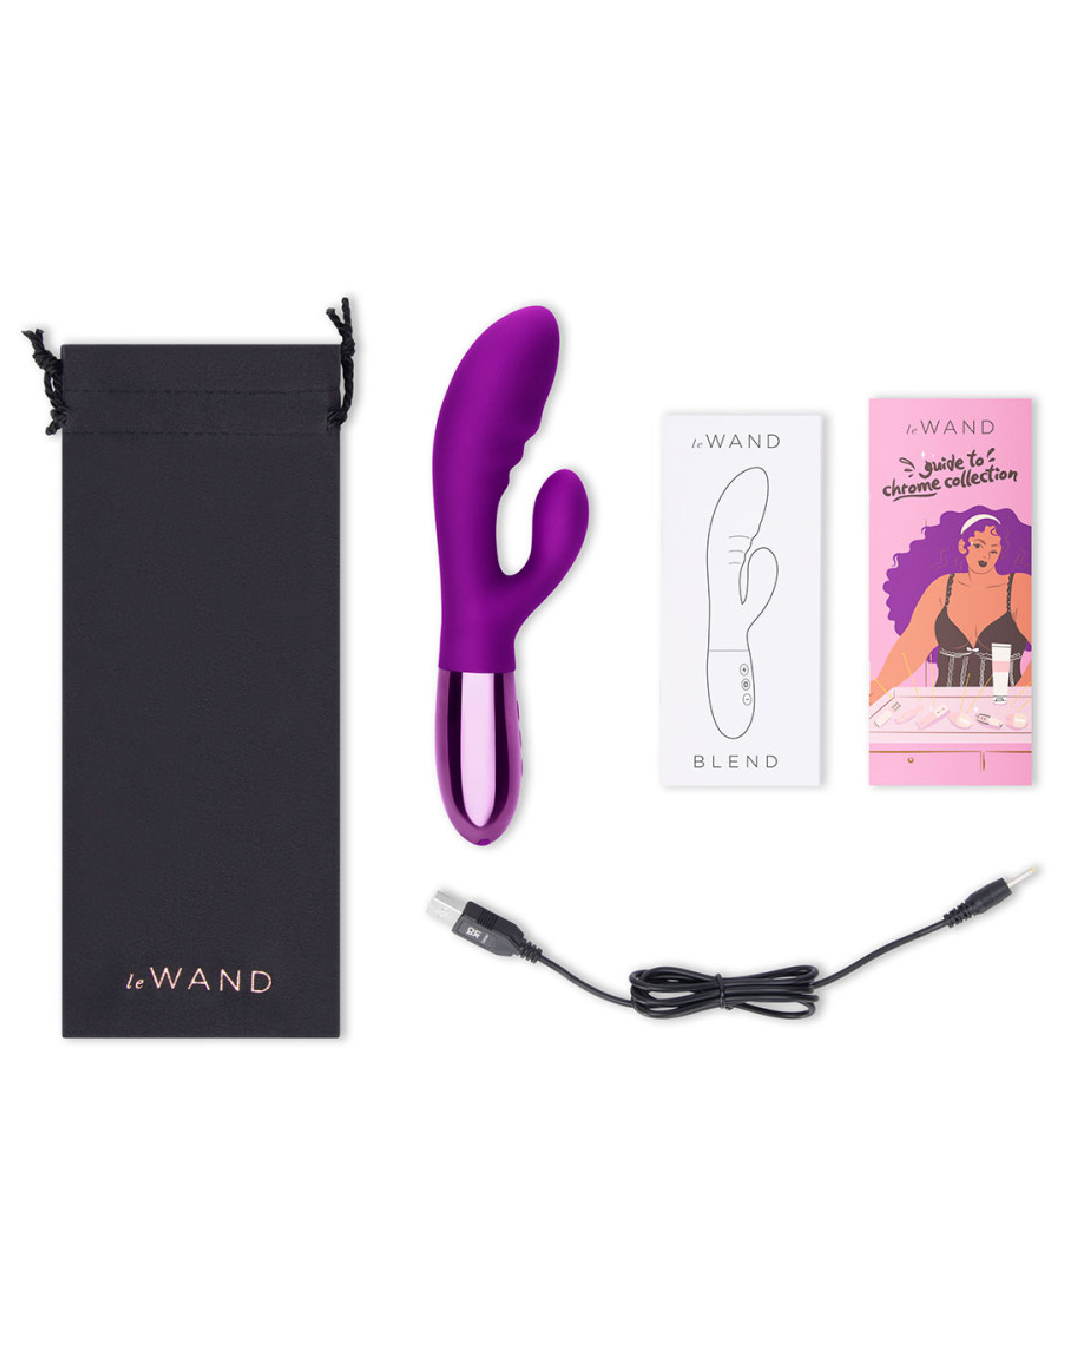 Le Wand Blend Double Motor Rechargeable Rabbit Vibrator - Dark Cherry package contents